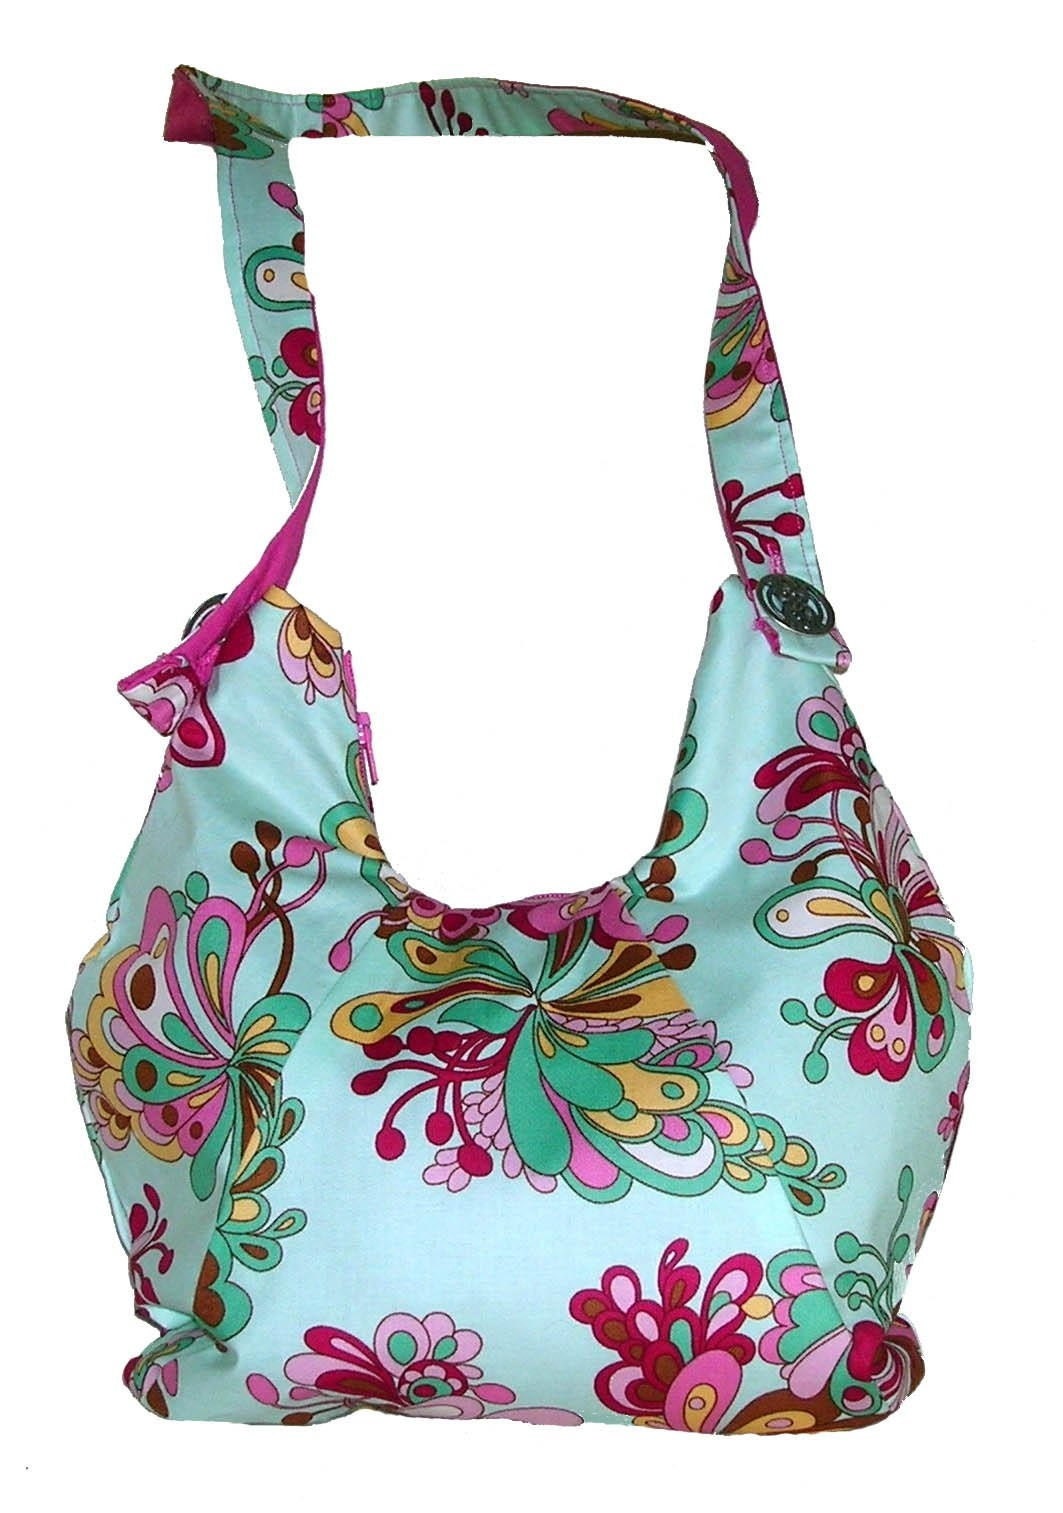 Spring, Blue and Pink Floral-Swirl Purse